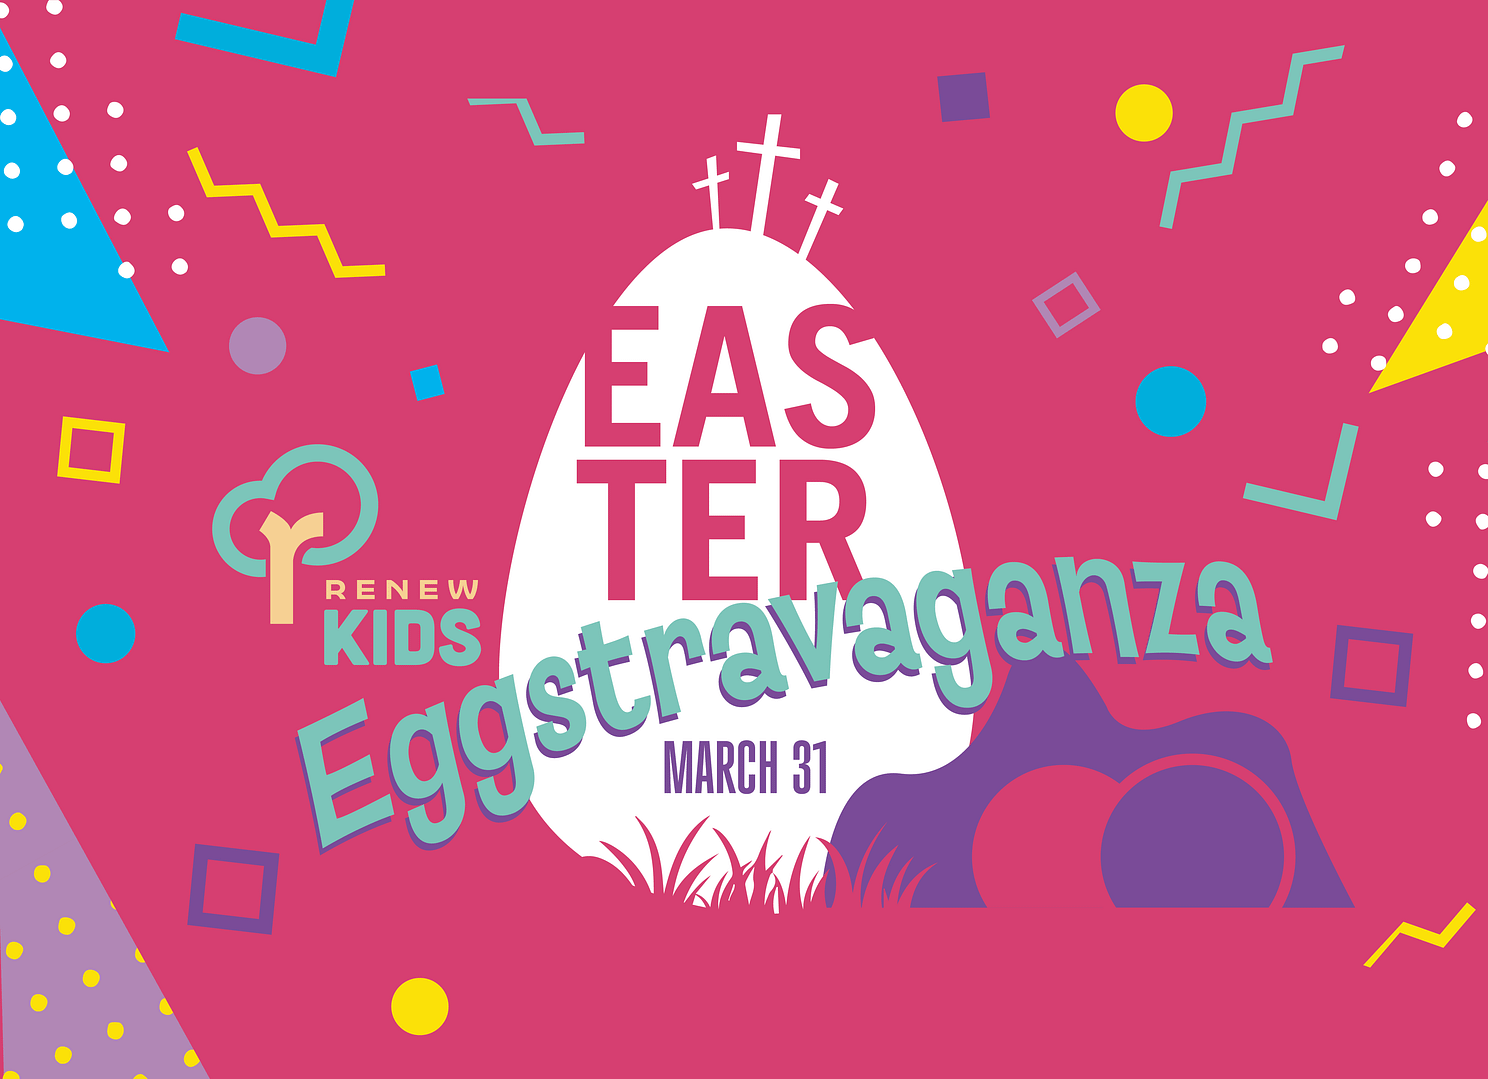 Featured image for “Easter with Renew Kids”